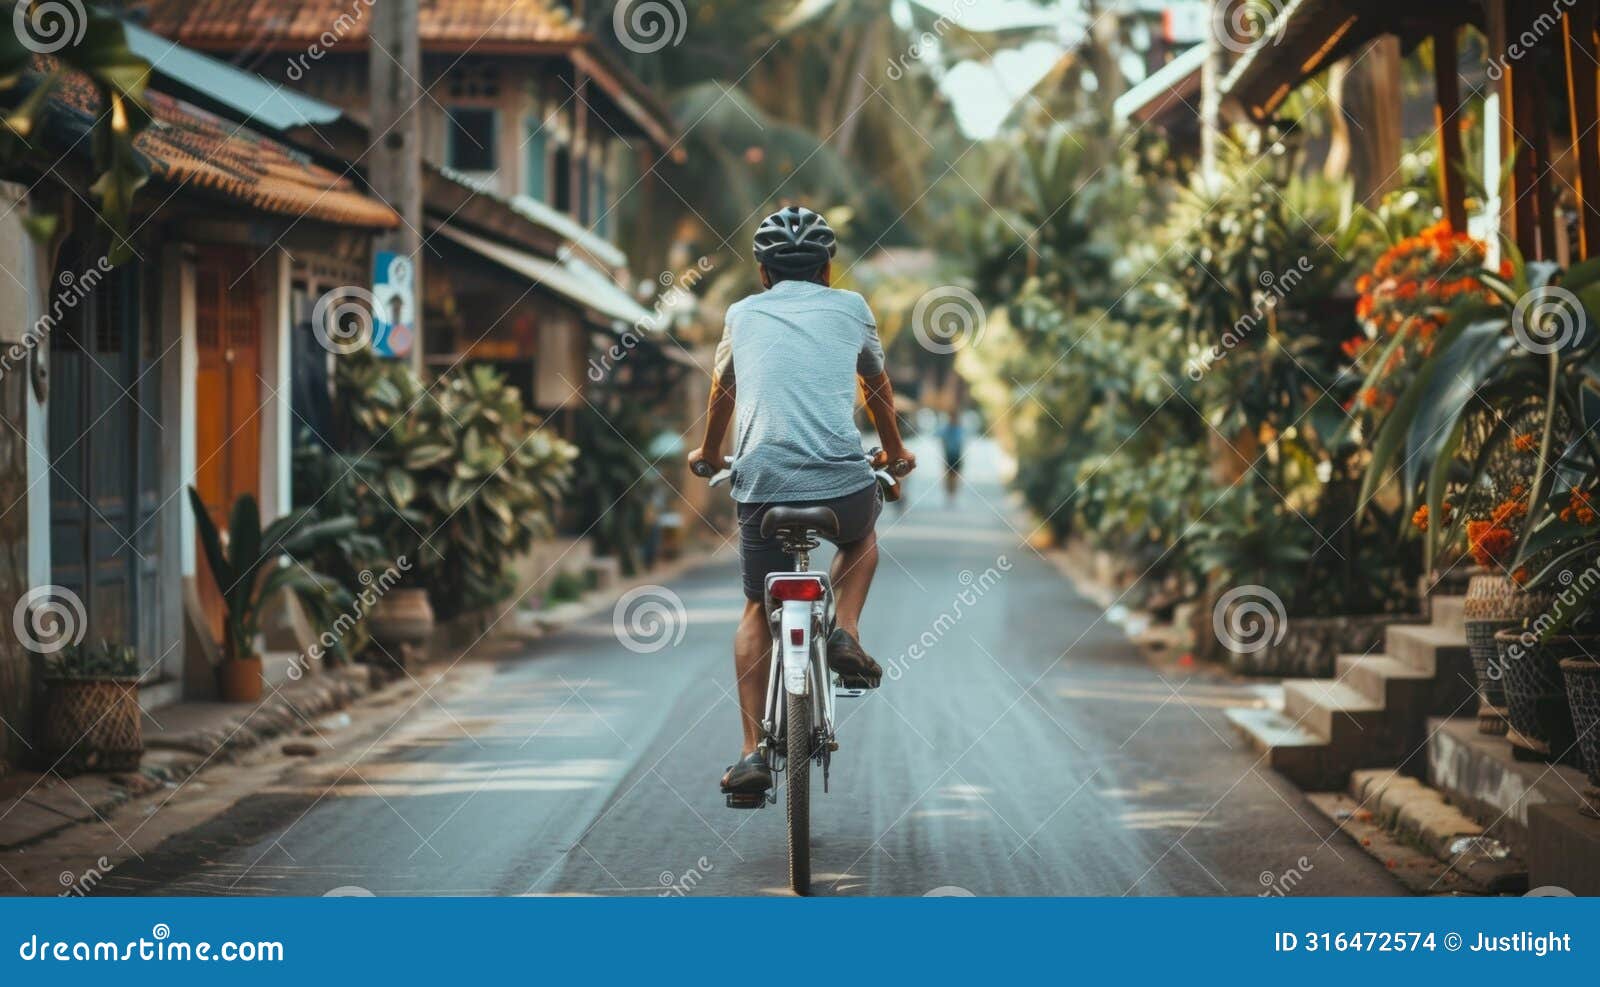 a traveler riding through a quaint village on a bicycle fully immersing themselves in the local culture during a sober